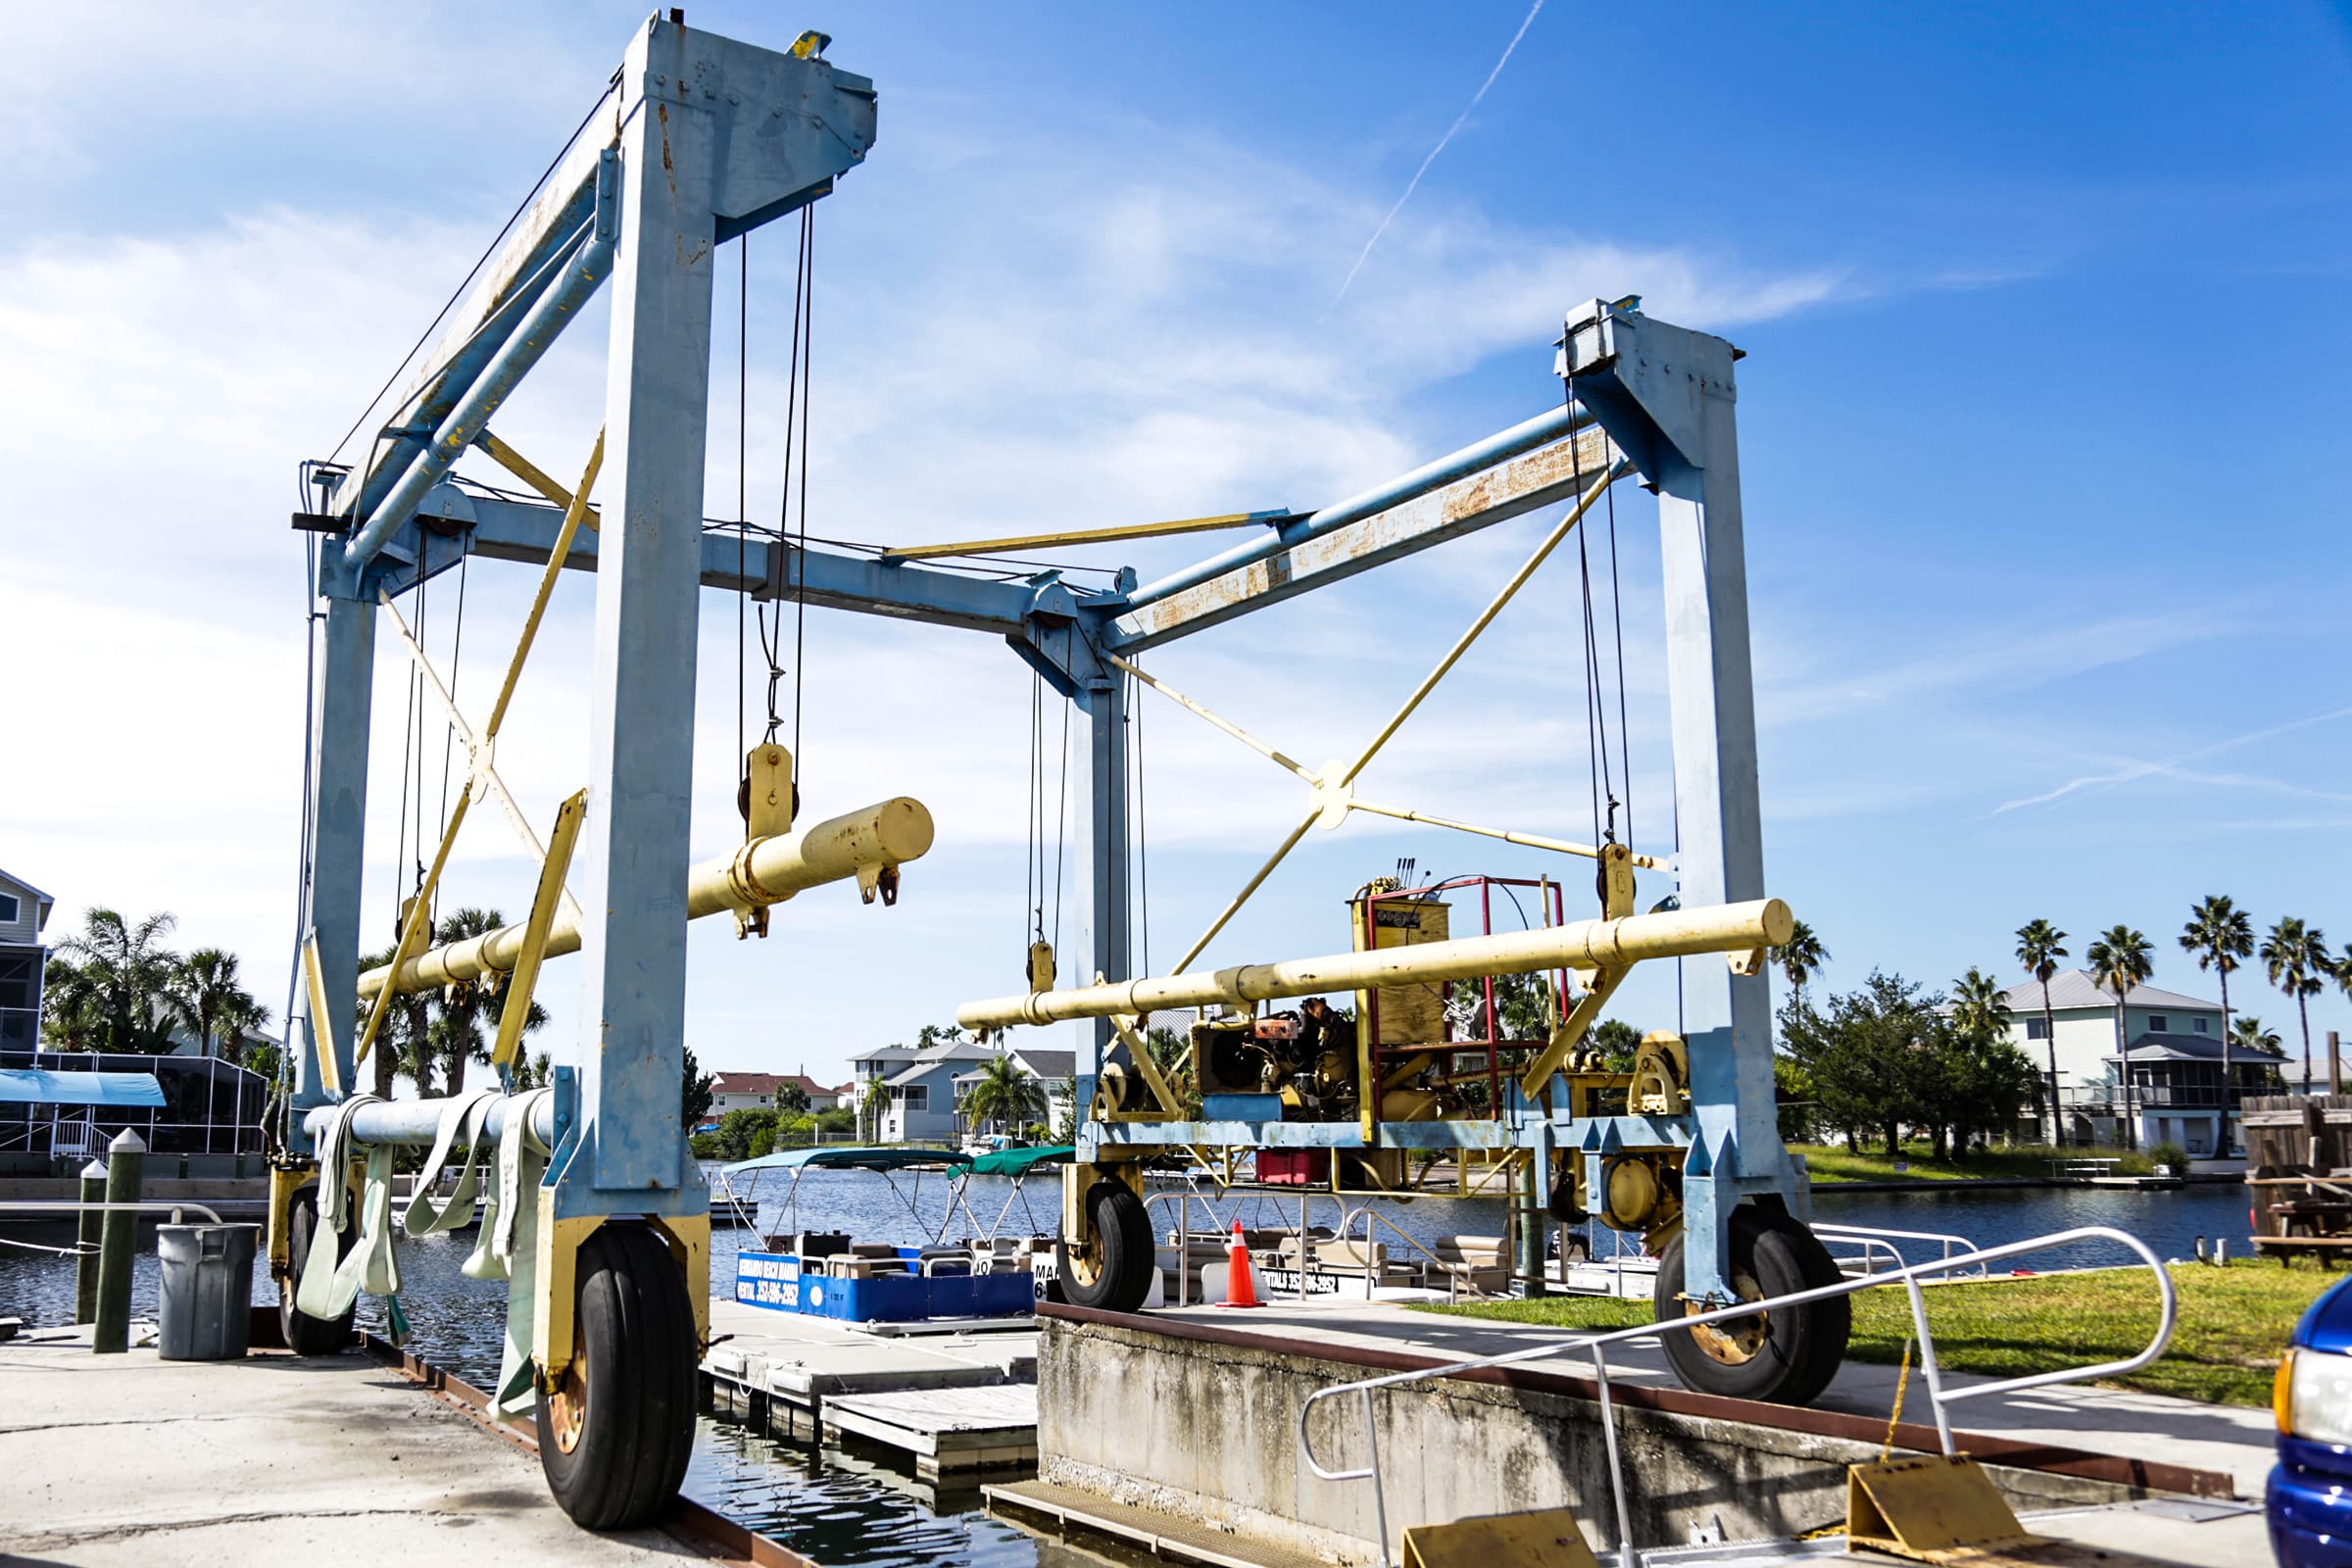 Haul Out station for removing boats from water for storage, sales or repairs at Hernando Beach Marina.